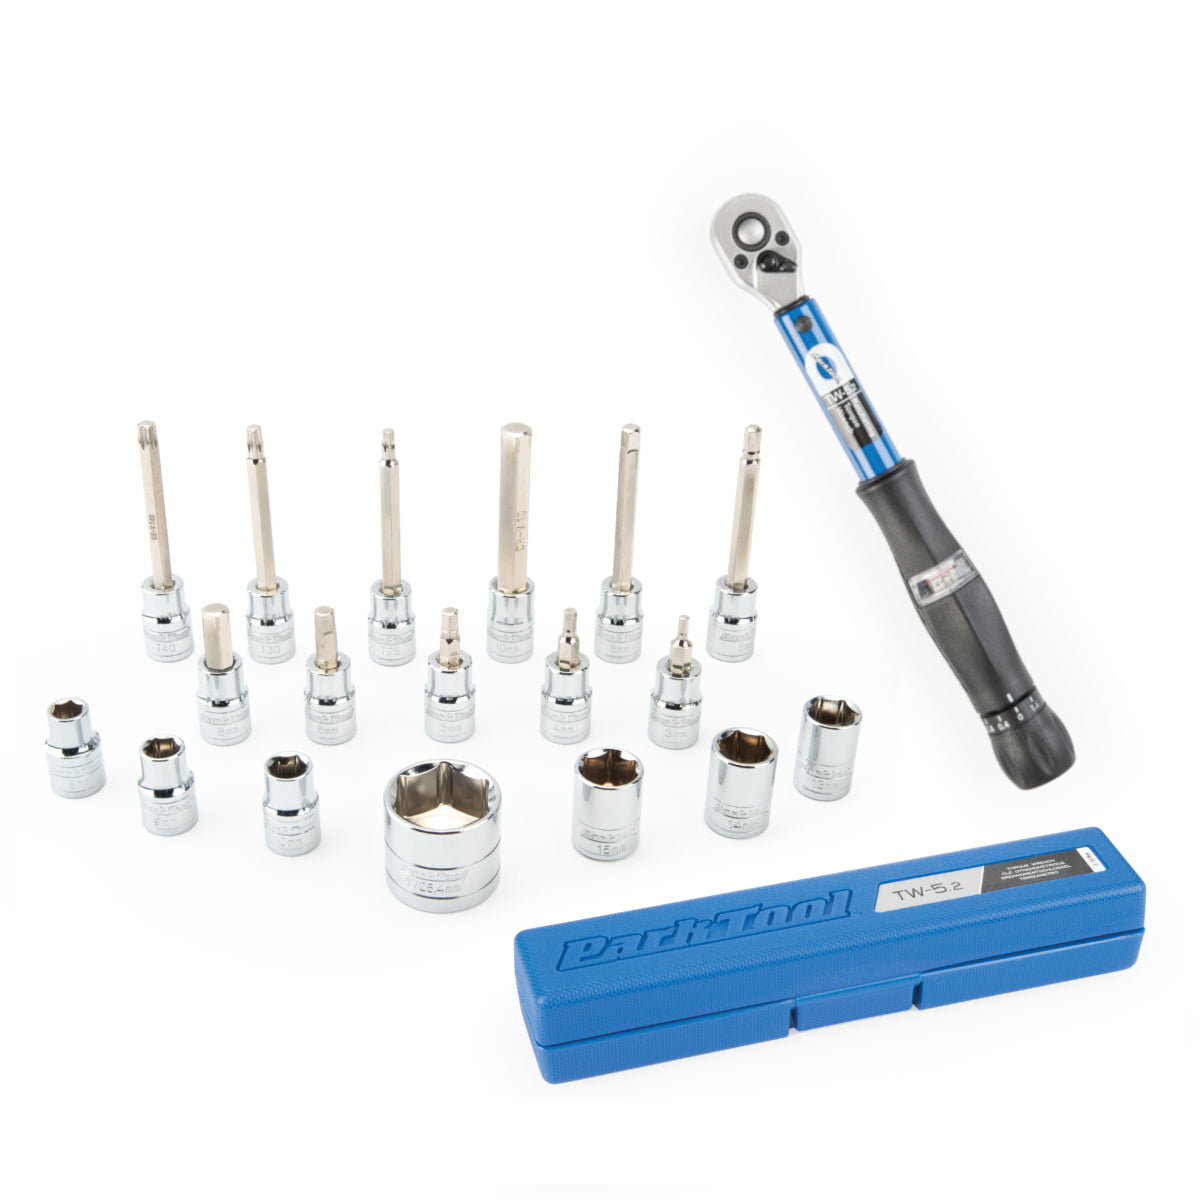 Park Tool TW-5.2 and SBS-1.2 Socket / Hex Bit and Torque Wrench Kit